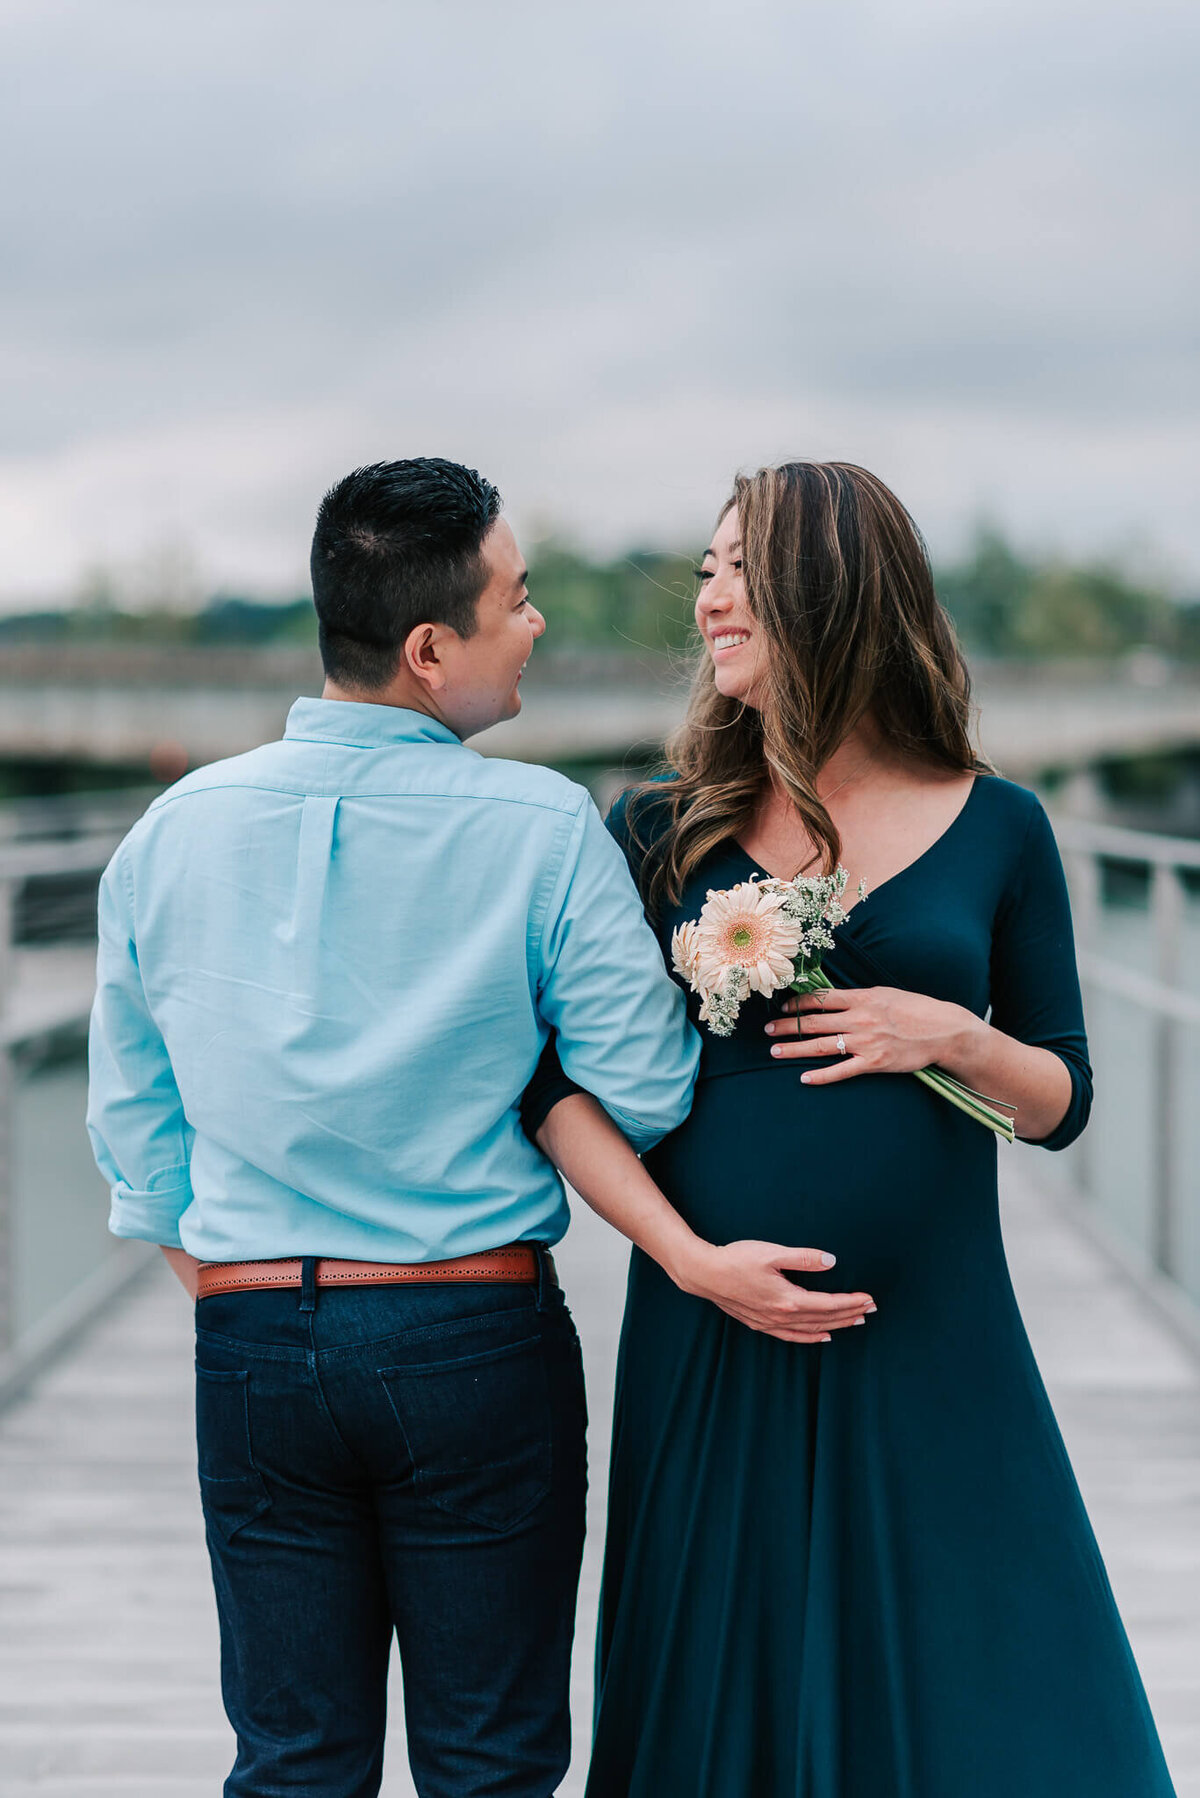 Maternity photos at the Kennedy Center on a cloudy evening